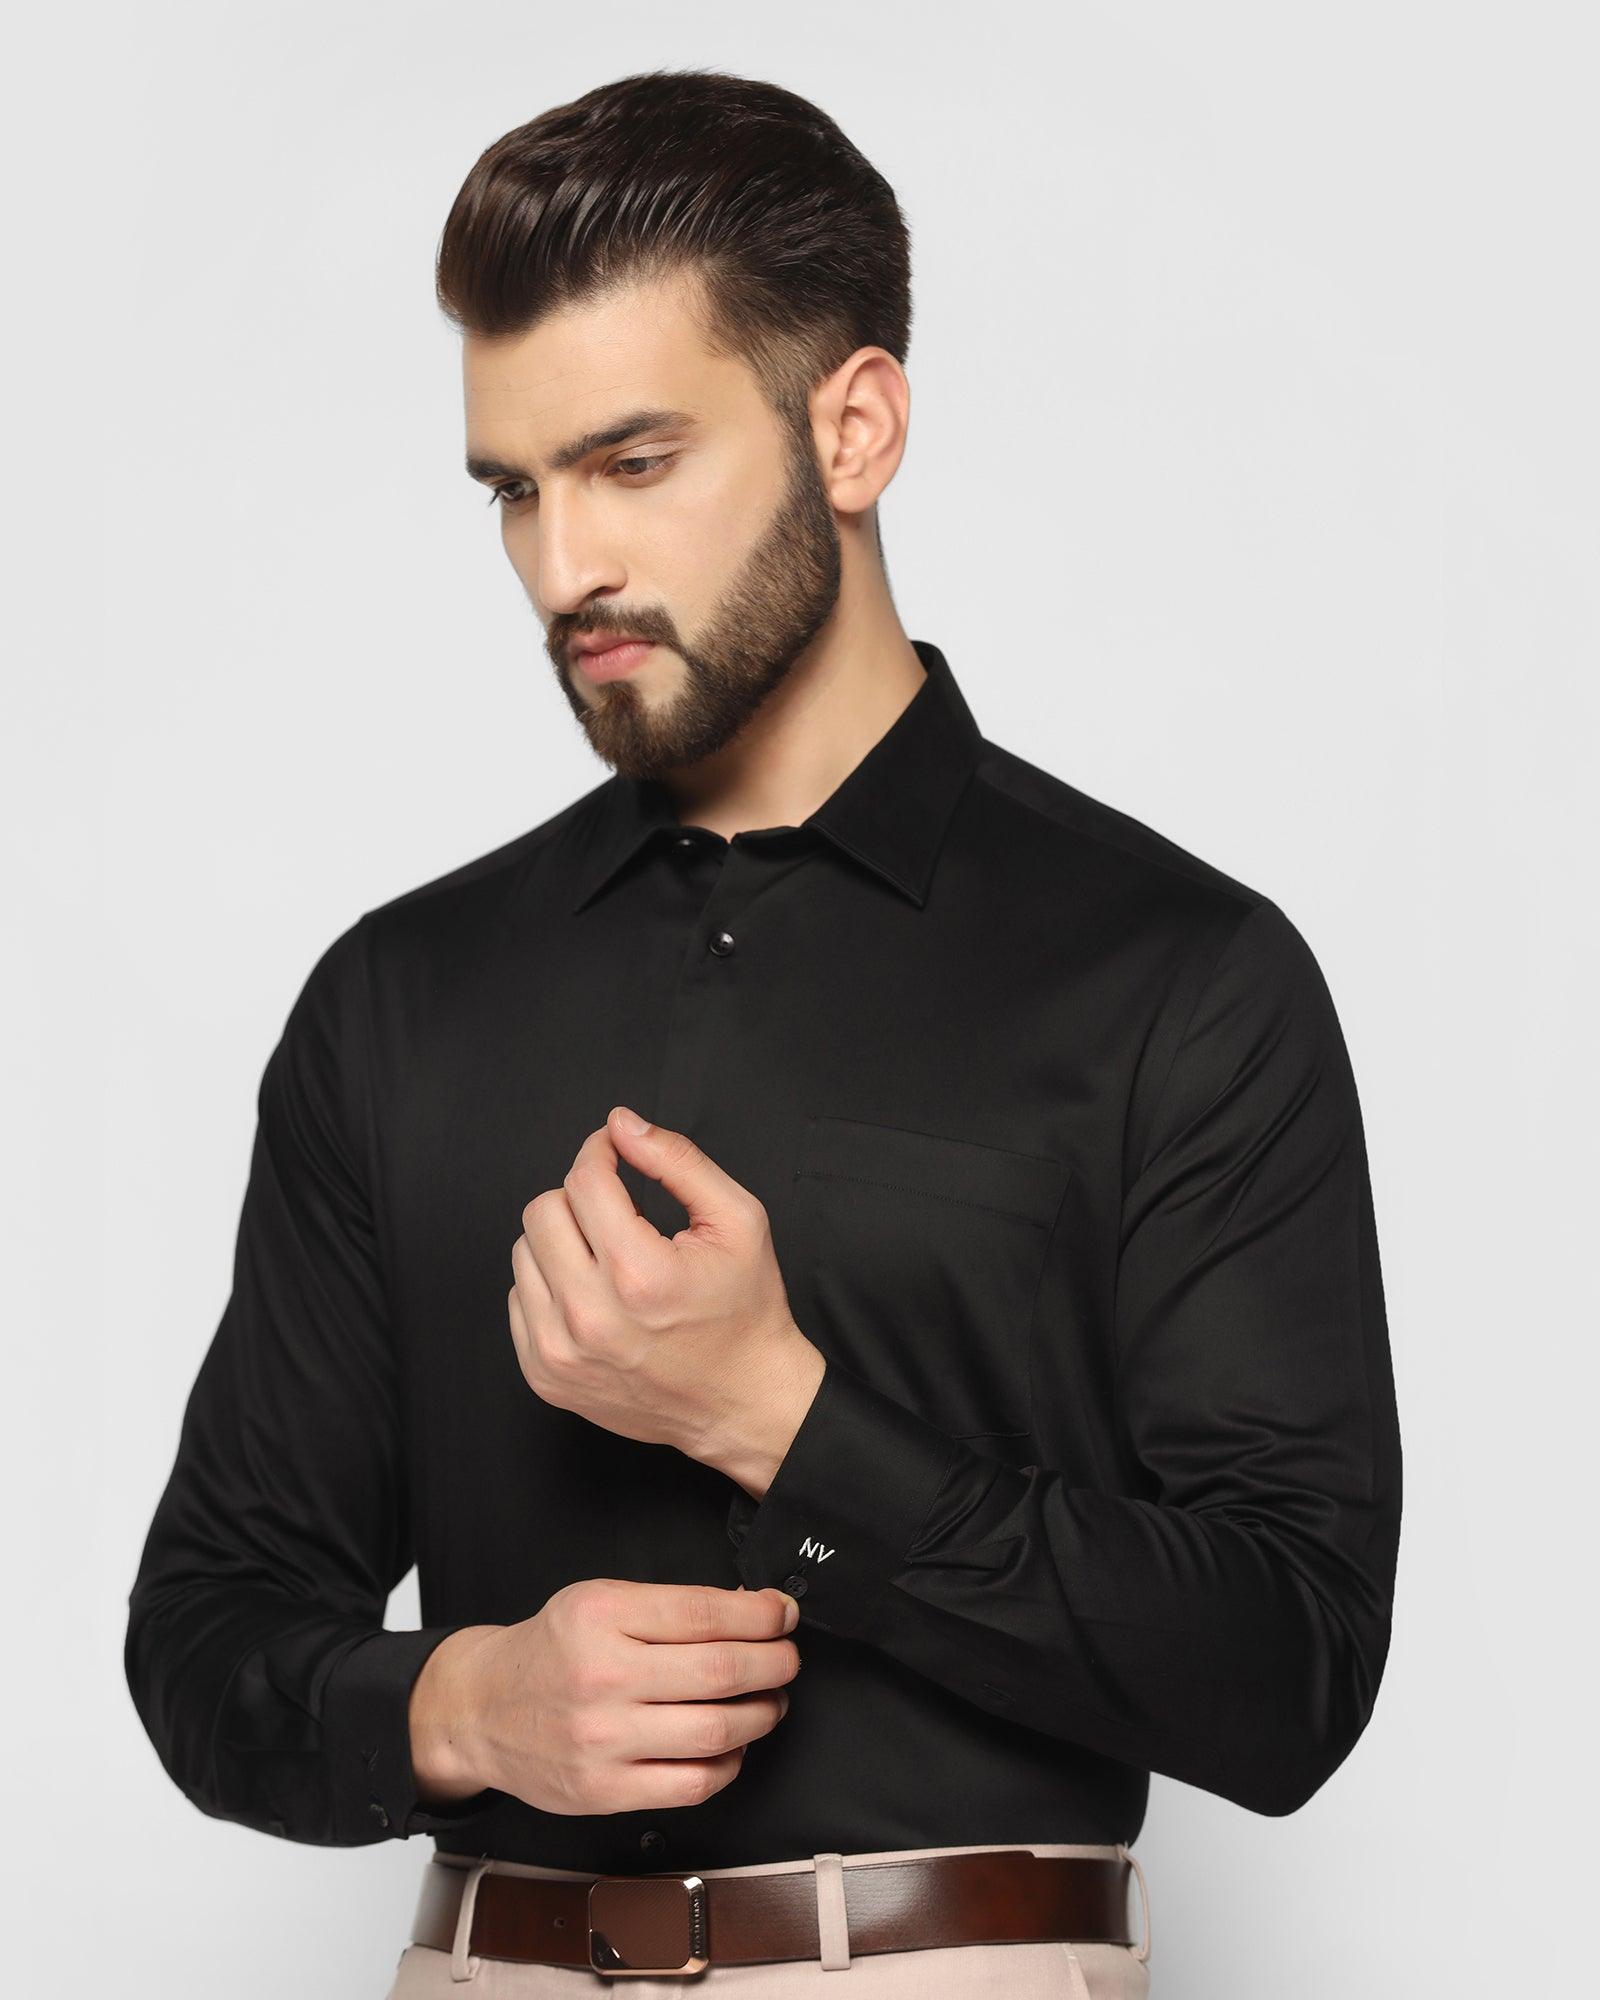 Personalized Formal Black Solid Shirt - Sailor